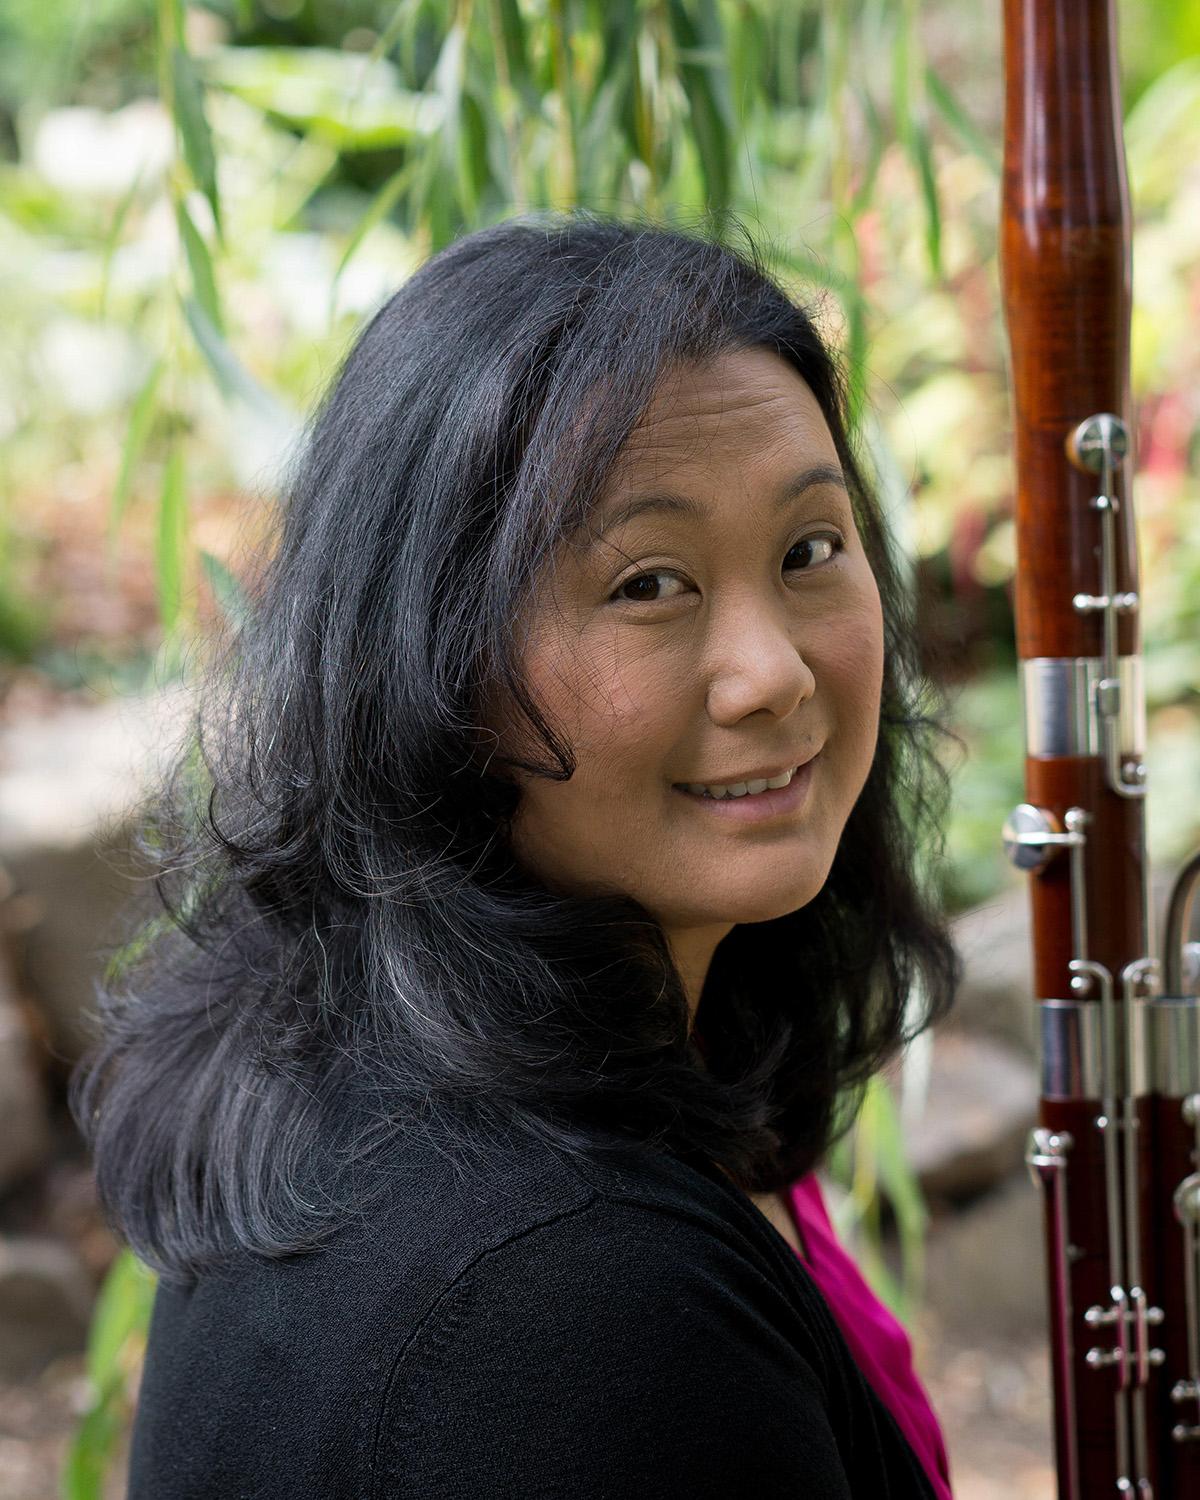 Elaine holding a bassoon, looking over her shoulder at the camera to smile